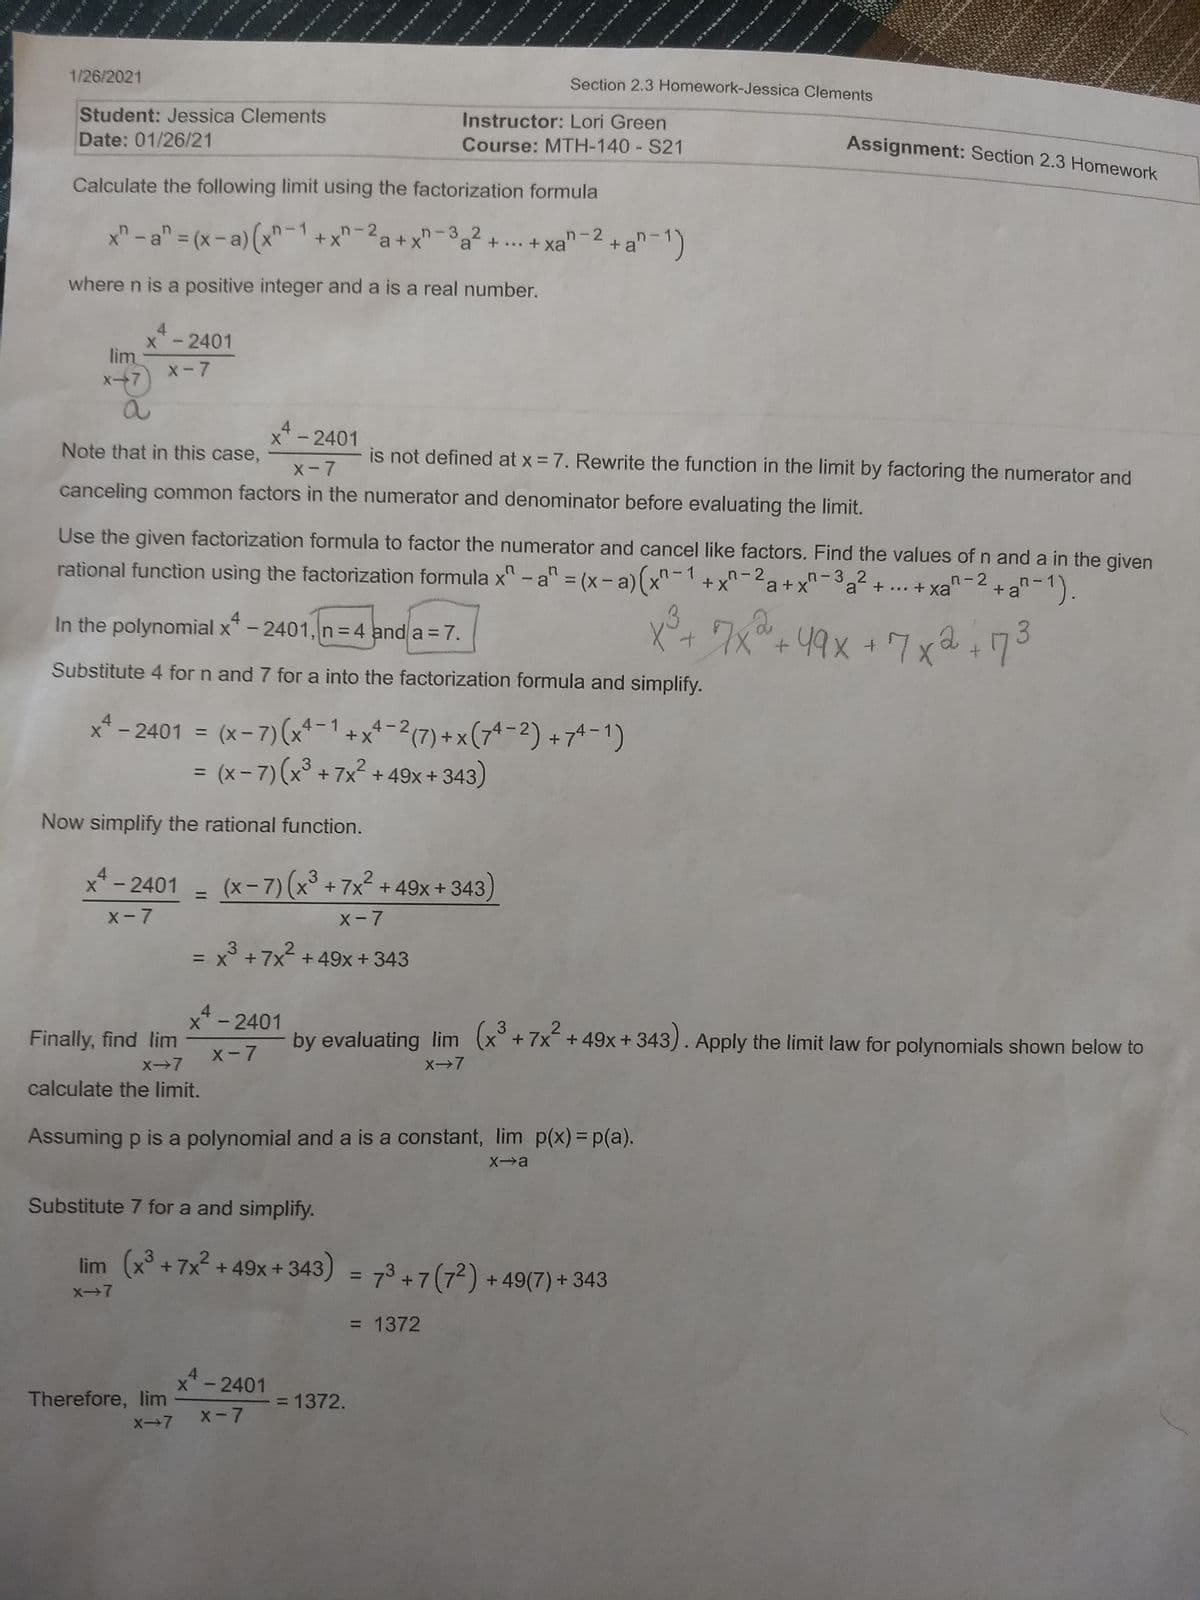 1/26/2021
Section 2.3 Homework-Jessica Clements
Student: Jessica Clements
Date: 01/26/21
Instructor: Lori Green
Course: MTH-140 S21
Assignment: Section 2.3 Homework
Calculate the following limit using the factorization formula
x" -a"= (x-a)(x-1+x*
"-2a+x-3a? + .. + xa
-3 2
where n is a positive integer and a is a real number.
4
x-2401
lim
X-7
X-7
4
X -2401
Note that in this case,
is not defined at x = 7. Rewrite the function in the limit by factoring the numerator and
X-7
canceling common factors in the numerator and denominator before evaluating the limit.
Use the given factorization formula to factor the numerator and cancel like factors. Find the values of n and a in the given
rational functìon using the factorization formula x
^ -a" = (x-a)(x-1 +x'
n-2
a+x'
n-3 2
a +...+ Xa
n- 2
+a"-1).
%3D
4
In the polynomial x"-2401,n=4 and a = 7.
7x°+49x
3.
Substitute 4 for n and 7 for a into the factorization formula and simplify.
x* - 2401 = (x- 7)(x*-1 + x* -2(7) + x (7-2) +74-1)
= (x- 7)(x³ + 7x² +49x+ 343)
%3D
Now simplify the rational function.
4
X-2401
(x-7)(x° +7x² + 49x+ 343)
2
%3D
X-7
X-7
= x° +7x + 49x+343
4
X -2401
3
Finally, find lim
by evaluating lim (x°+7x+49x+ 343). Apply the limit law for polynomials shown below to
X-7
X→7
X→7
calculate the limit.
Assuming p is a polynomial and a is a constant, lim p(x)= p(a).
Xa
Substitute 7 for a and simplify.
lim (x³ + 7x2 + 49x+343) = 73+ 7 (72) + 49(7) +343
%3D
X-7
= 1372
4
X-2401
Therefore, lim
= 1372.
X-7
X-7
s ta
w
